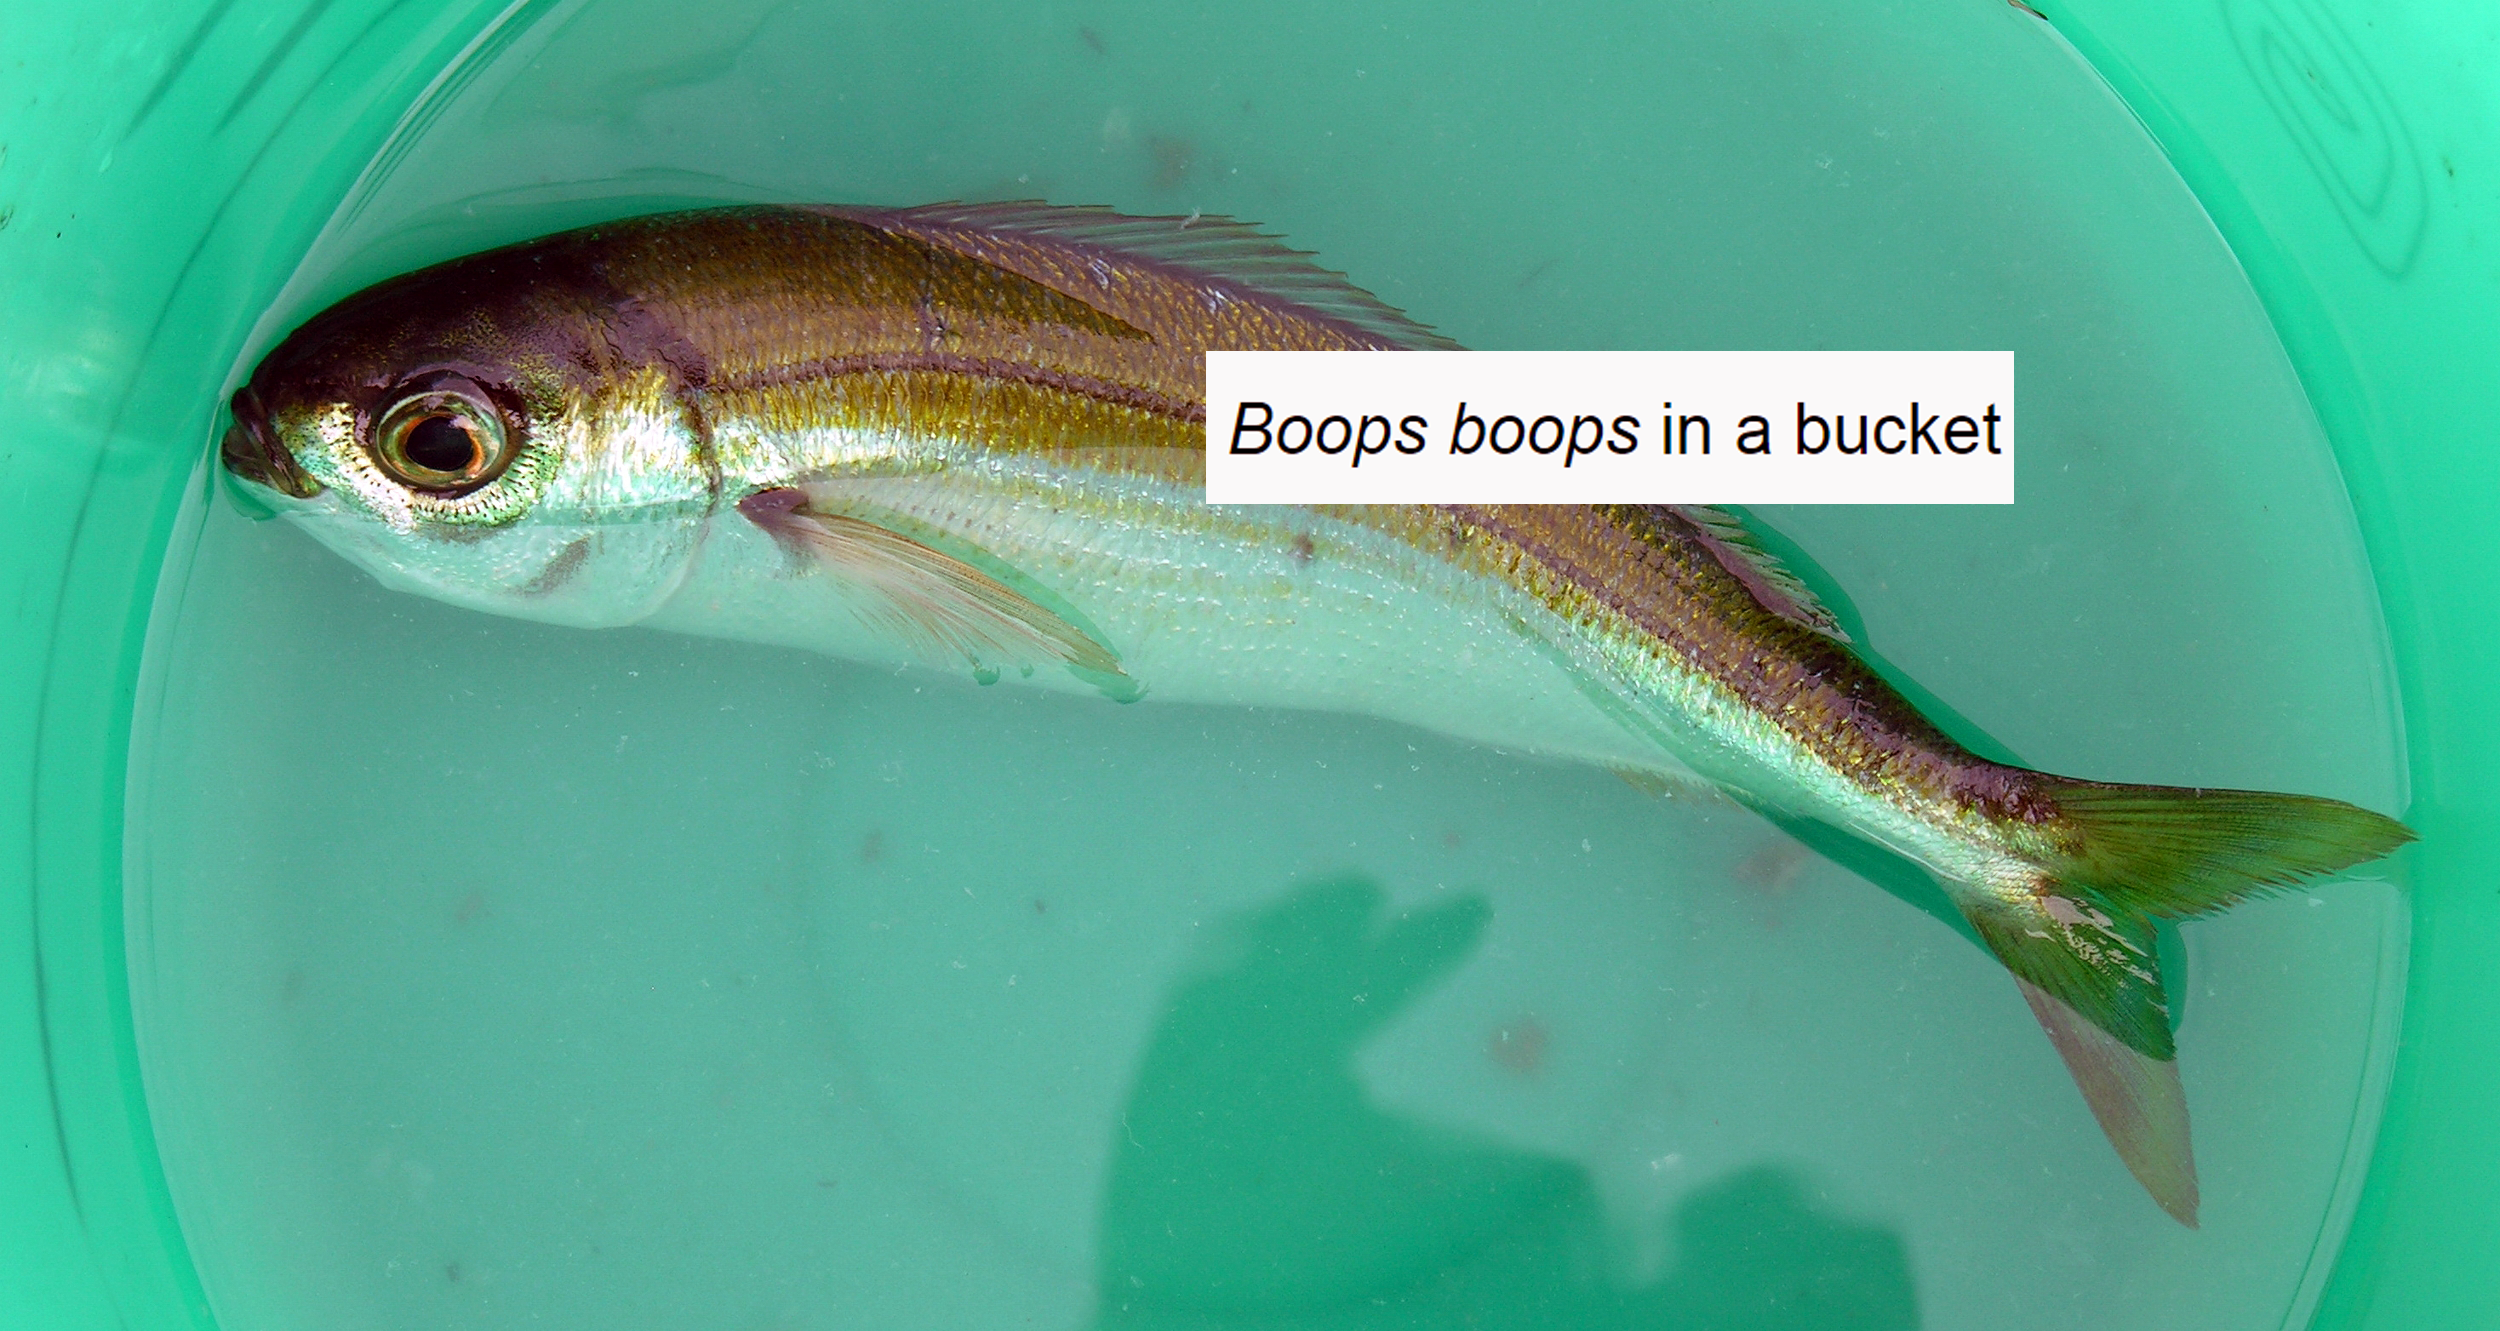 Boops boops in a bucket